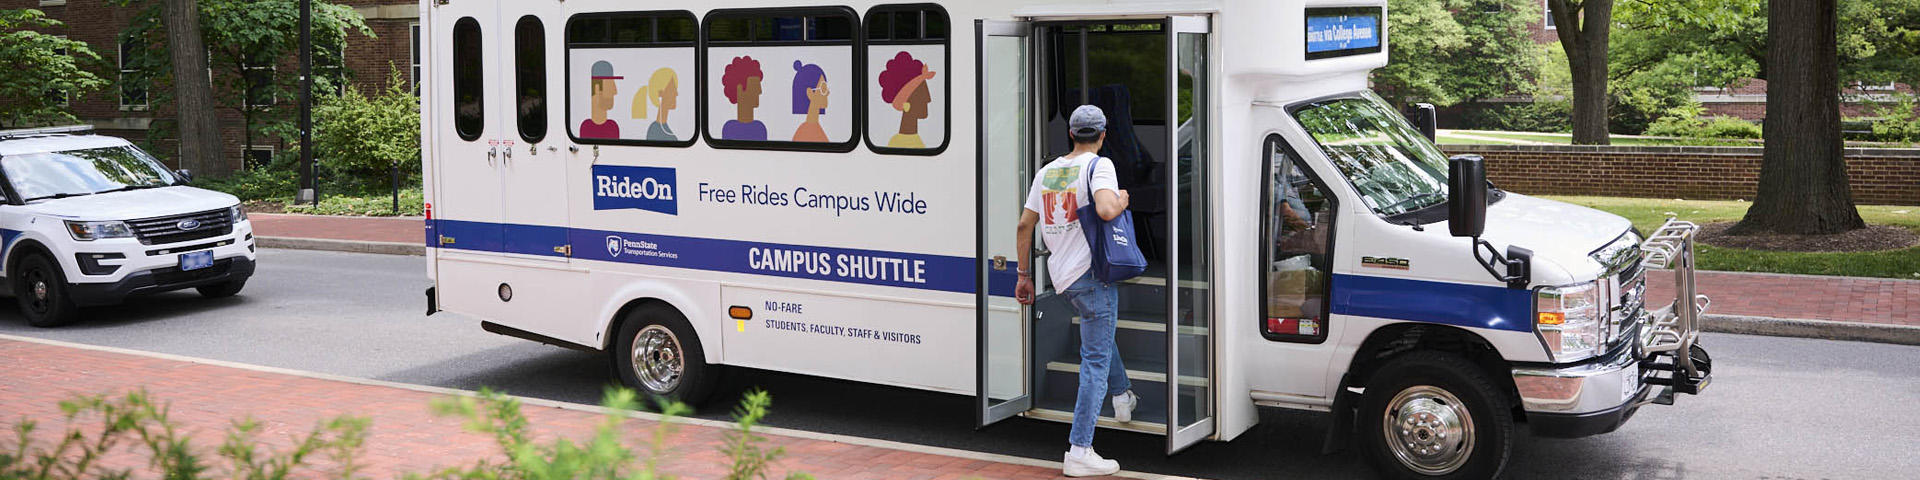 Rider getting on the Campus Shuttle